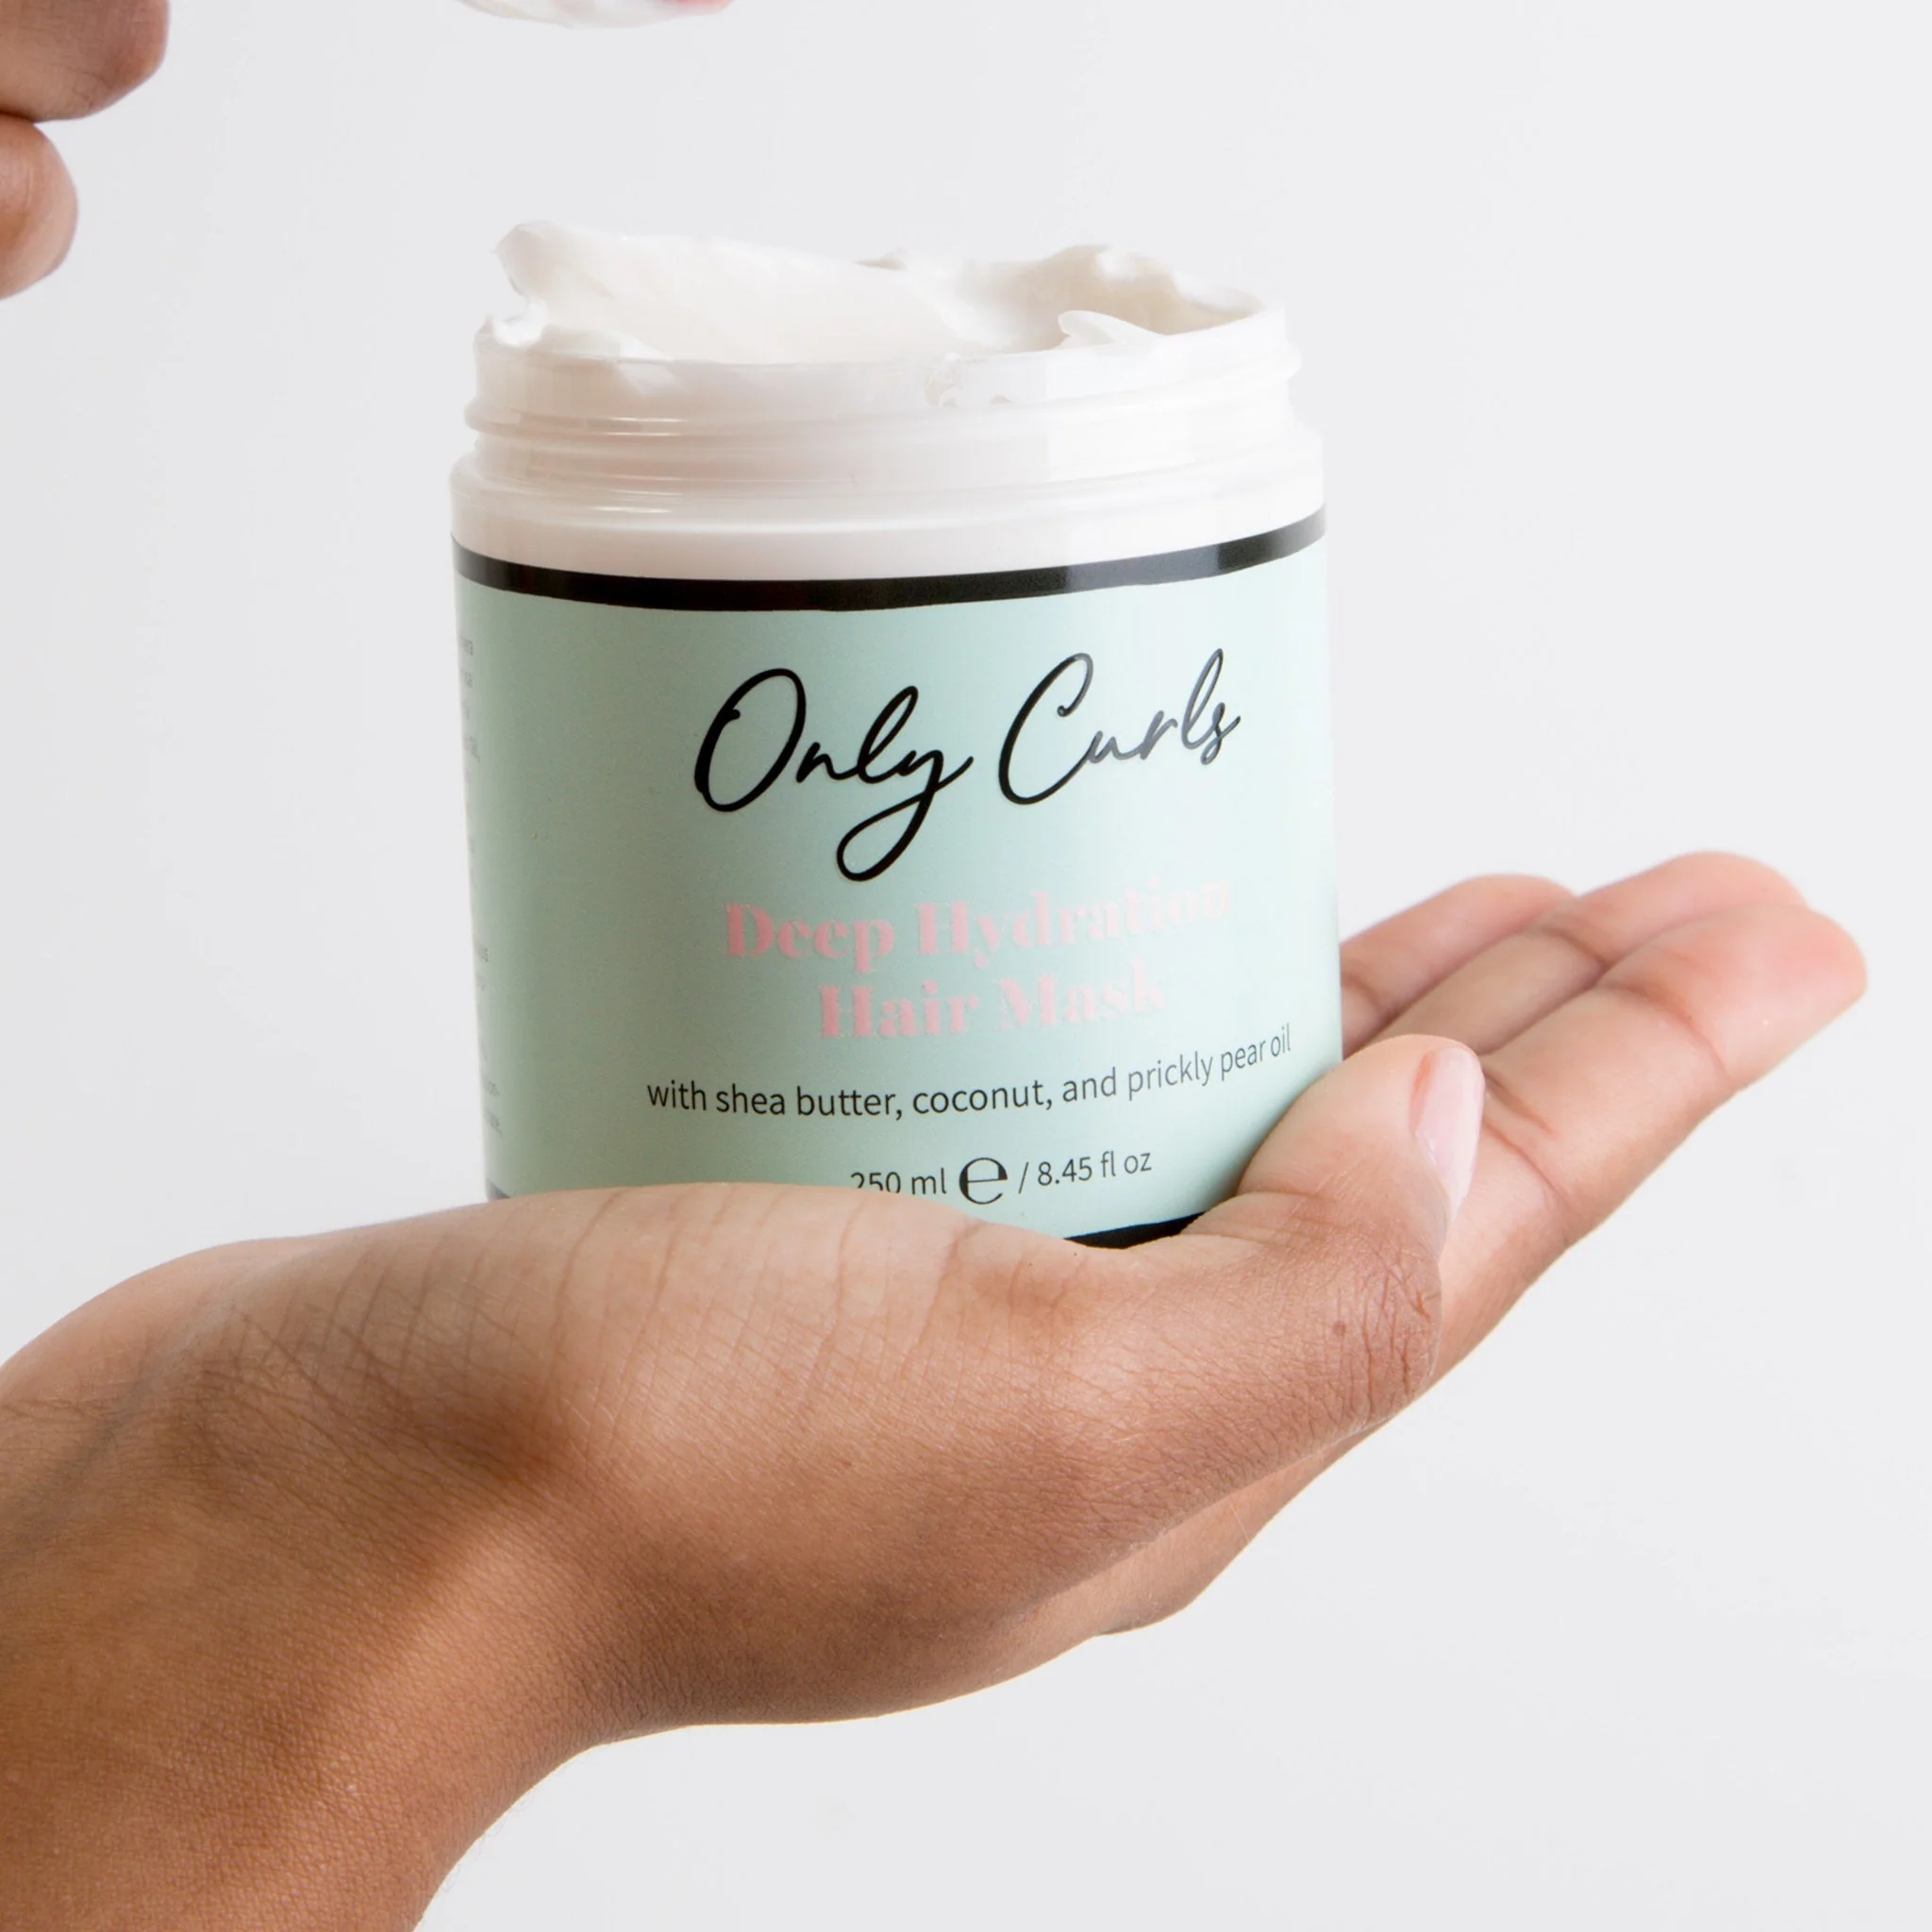 Only Curls Deep Hydration Hair Mask 